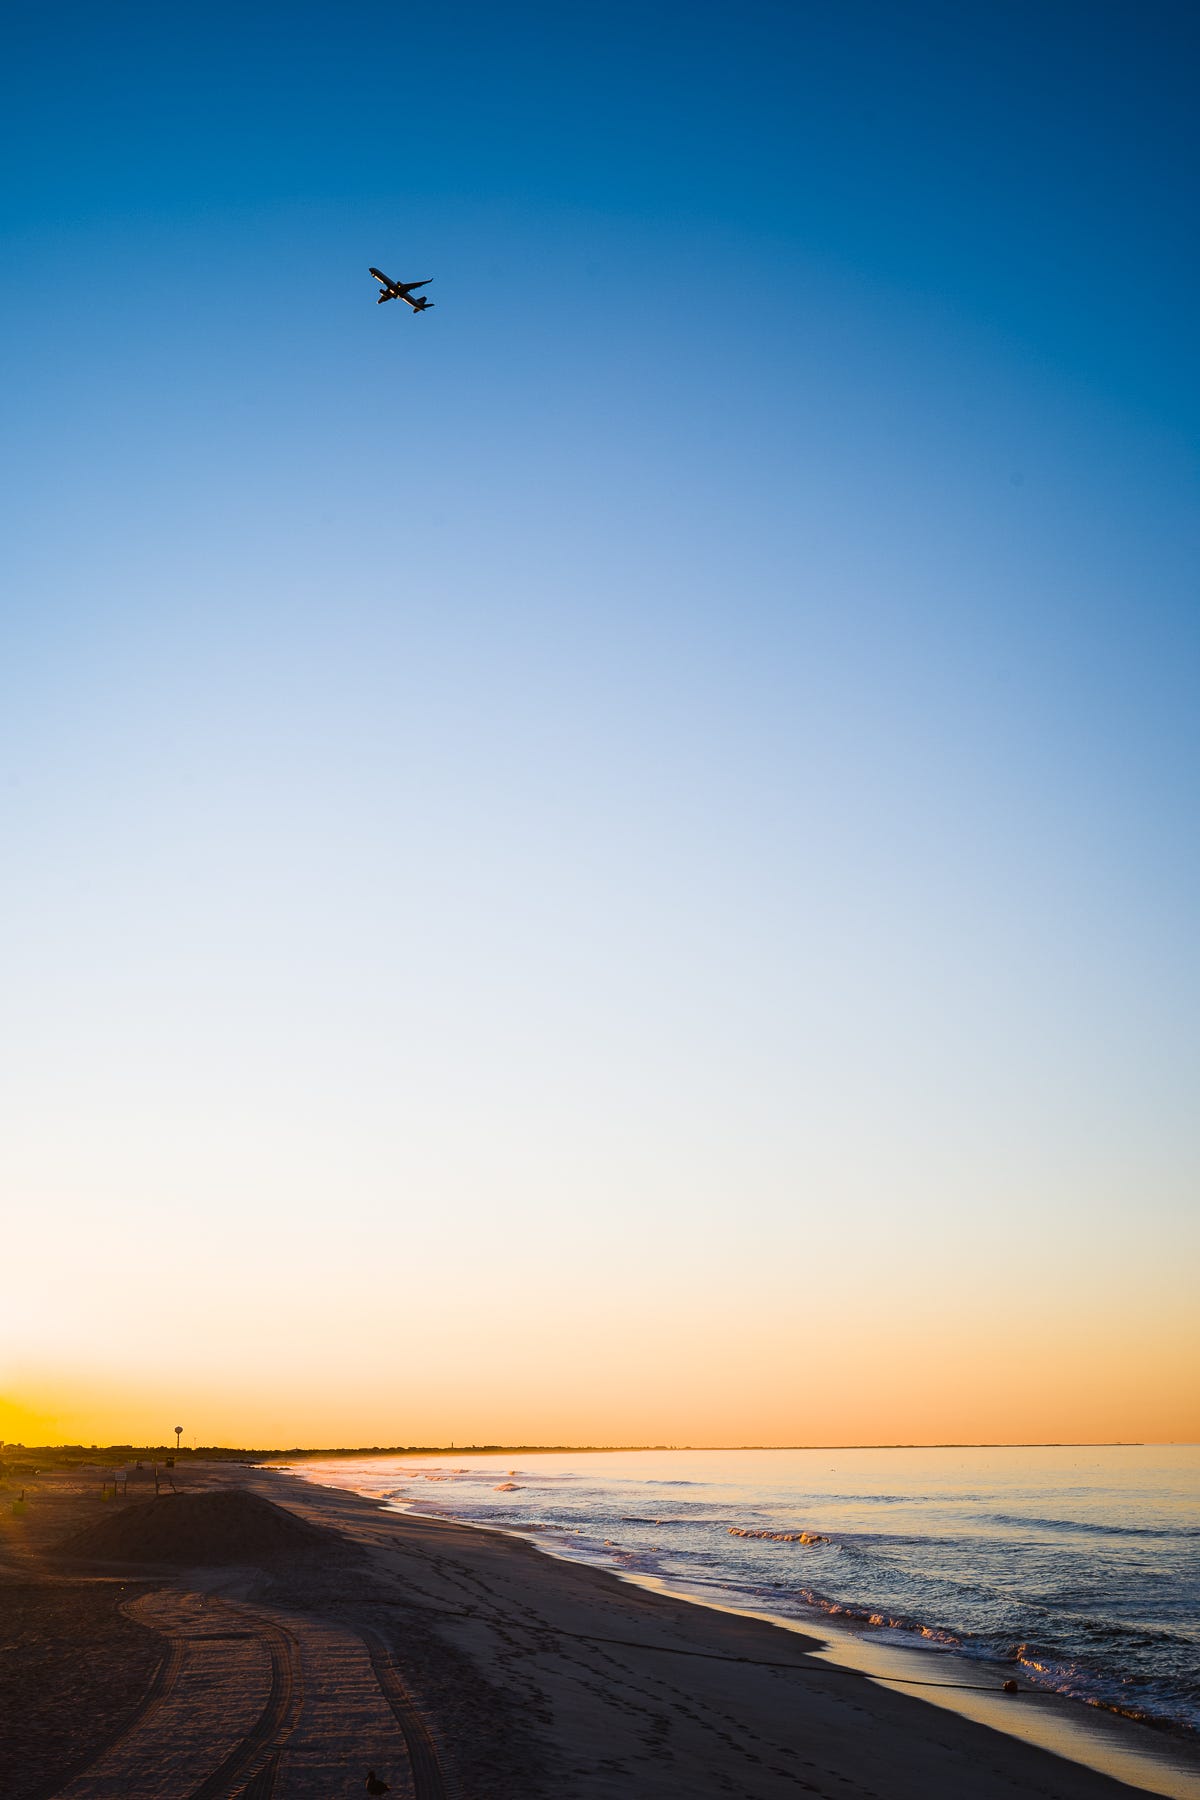 A plane flies over a beach at sunrise in a bright blue and orange sky as waves break against the sand